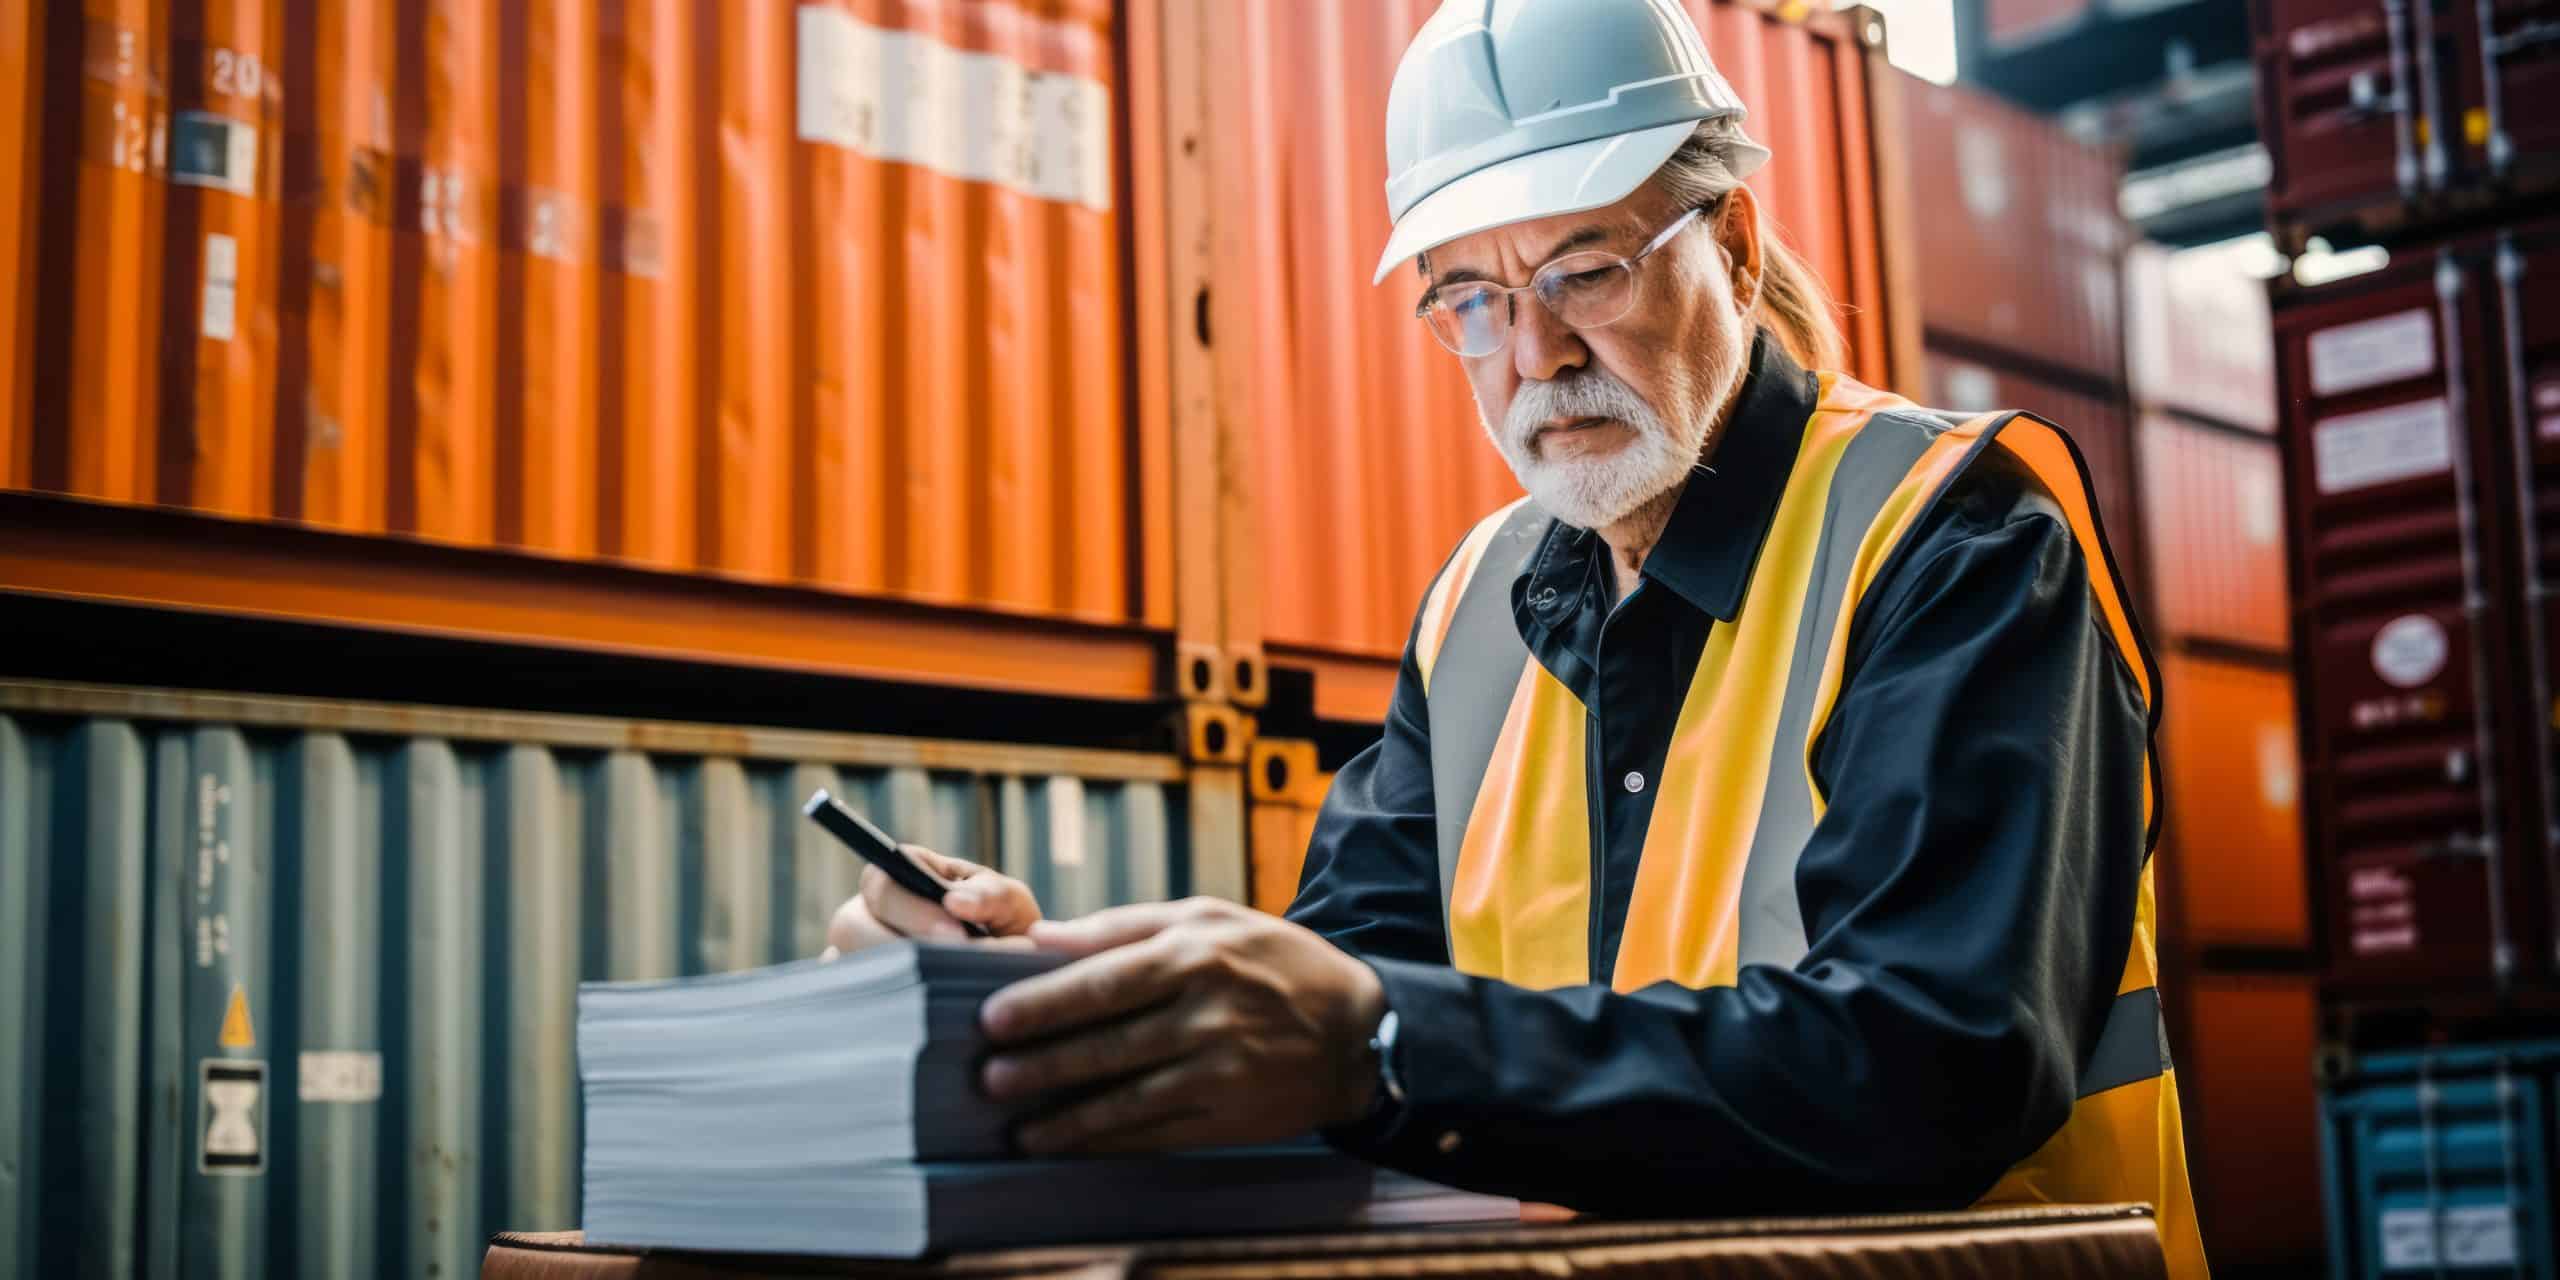 portrait of Customs Broker. Prepare customs documentation and ensure that shipments meet all applicable laws to facilitate the import and export of goods. Determine and track duties & taxes payable